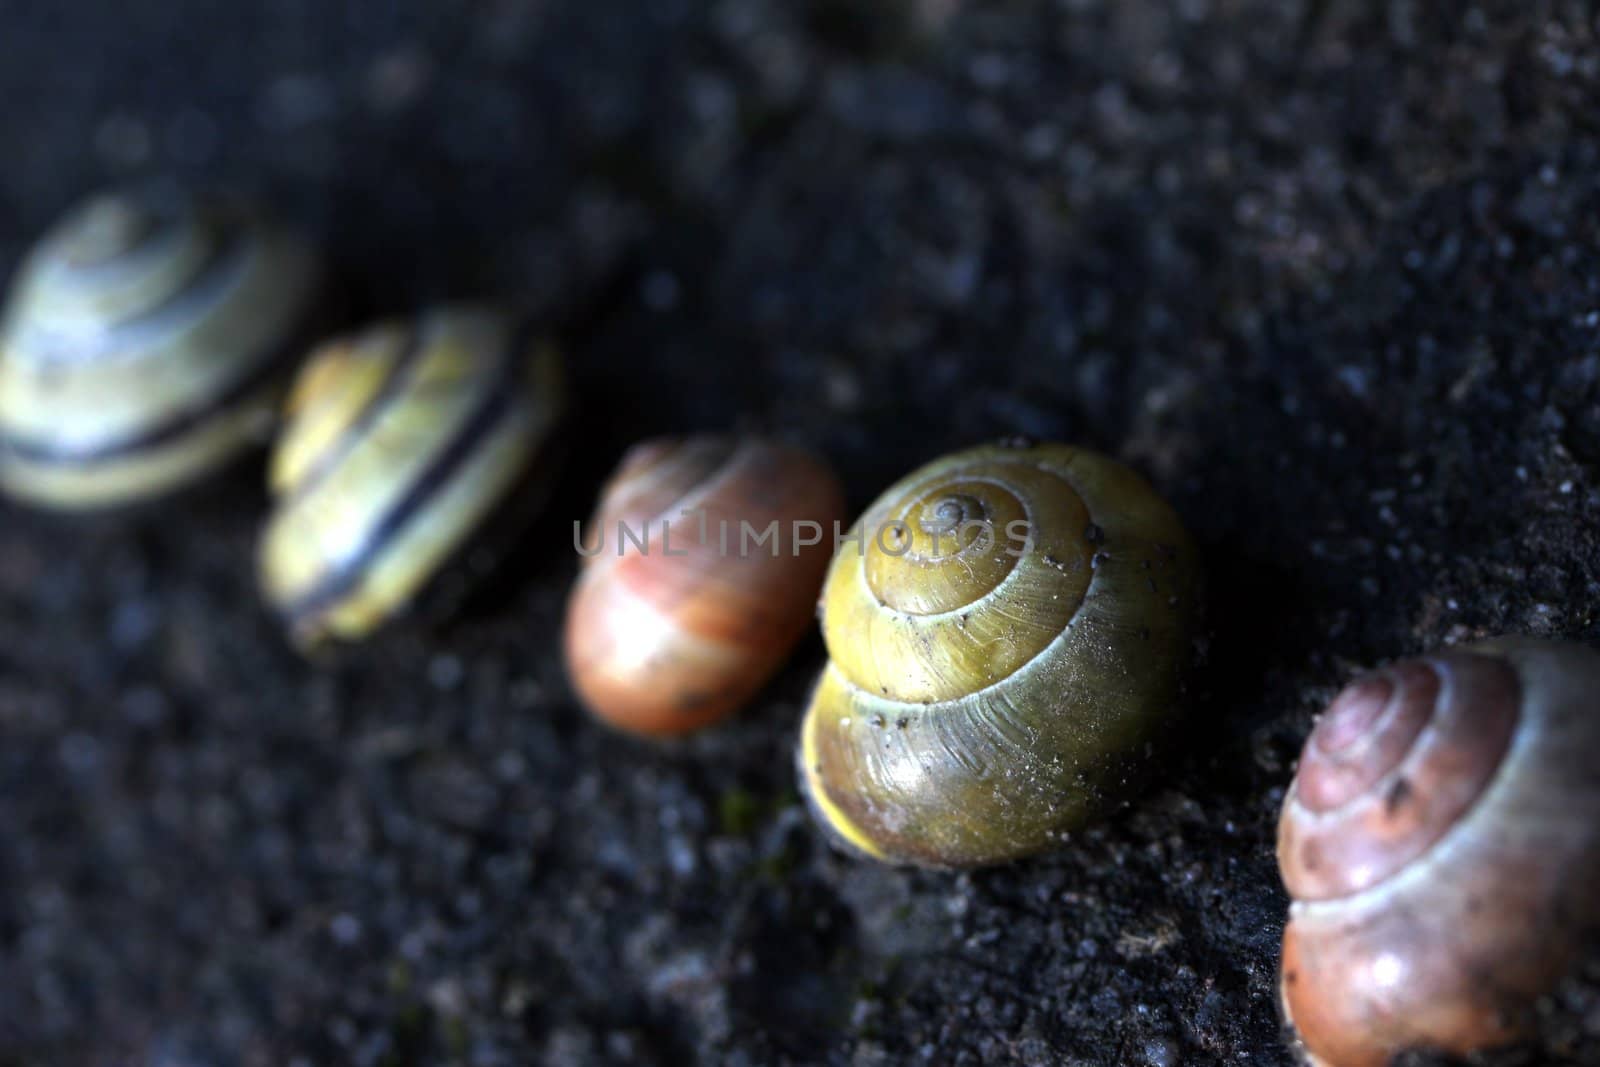 different snail houses